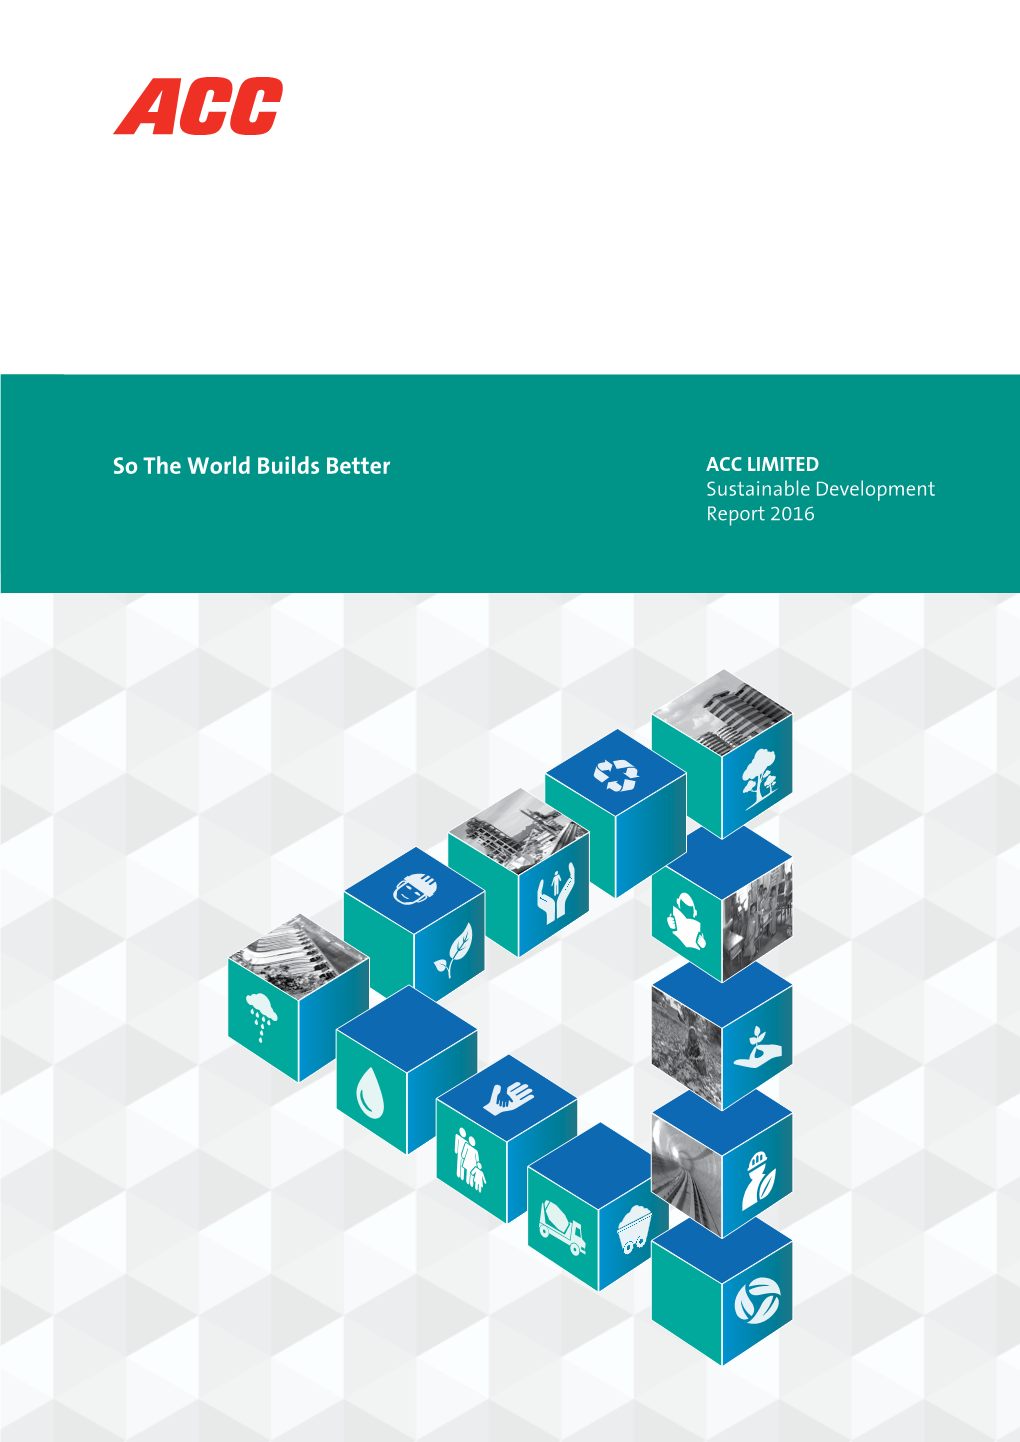 So the World Builds Better ACC LIMITED Sustainable Development Report 2016 Contents